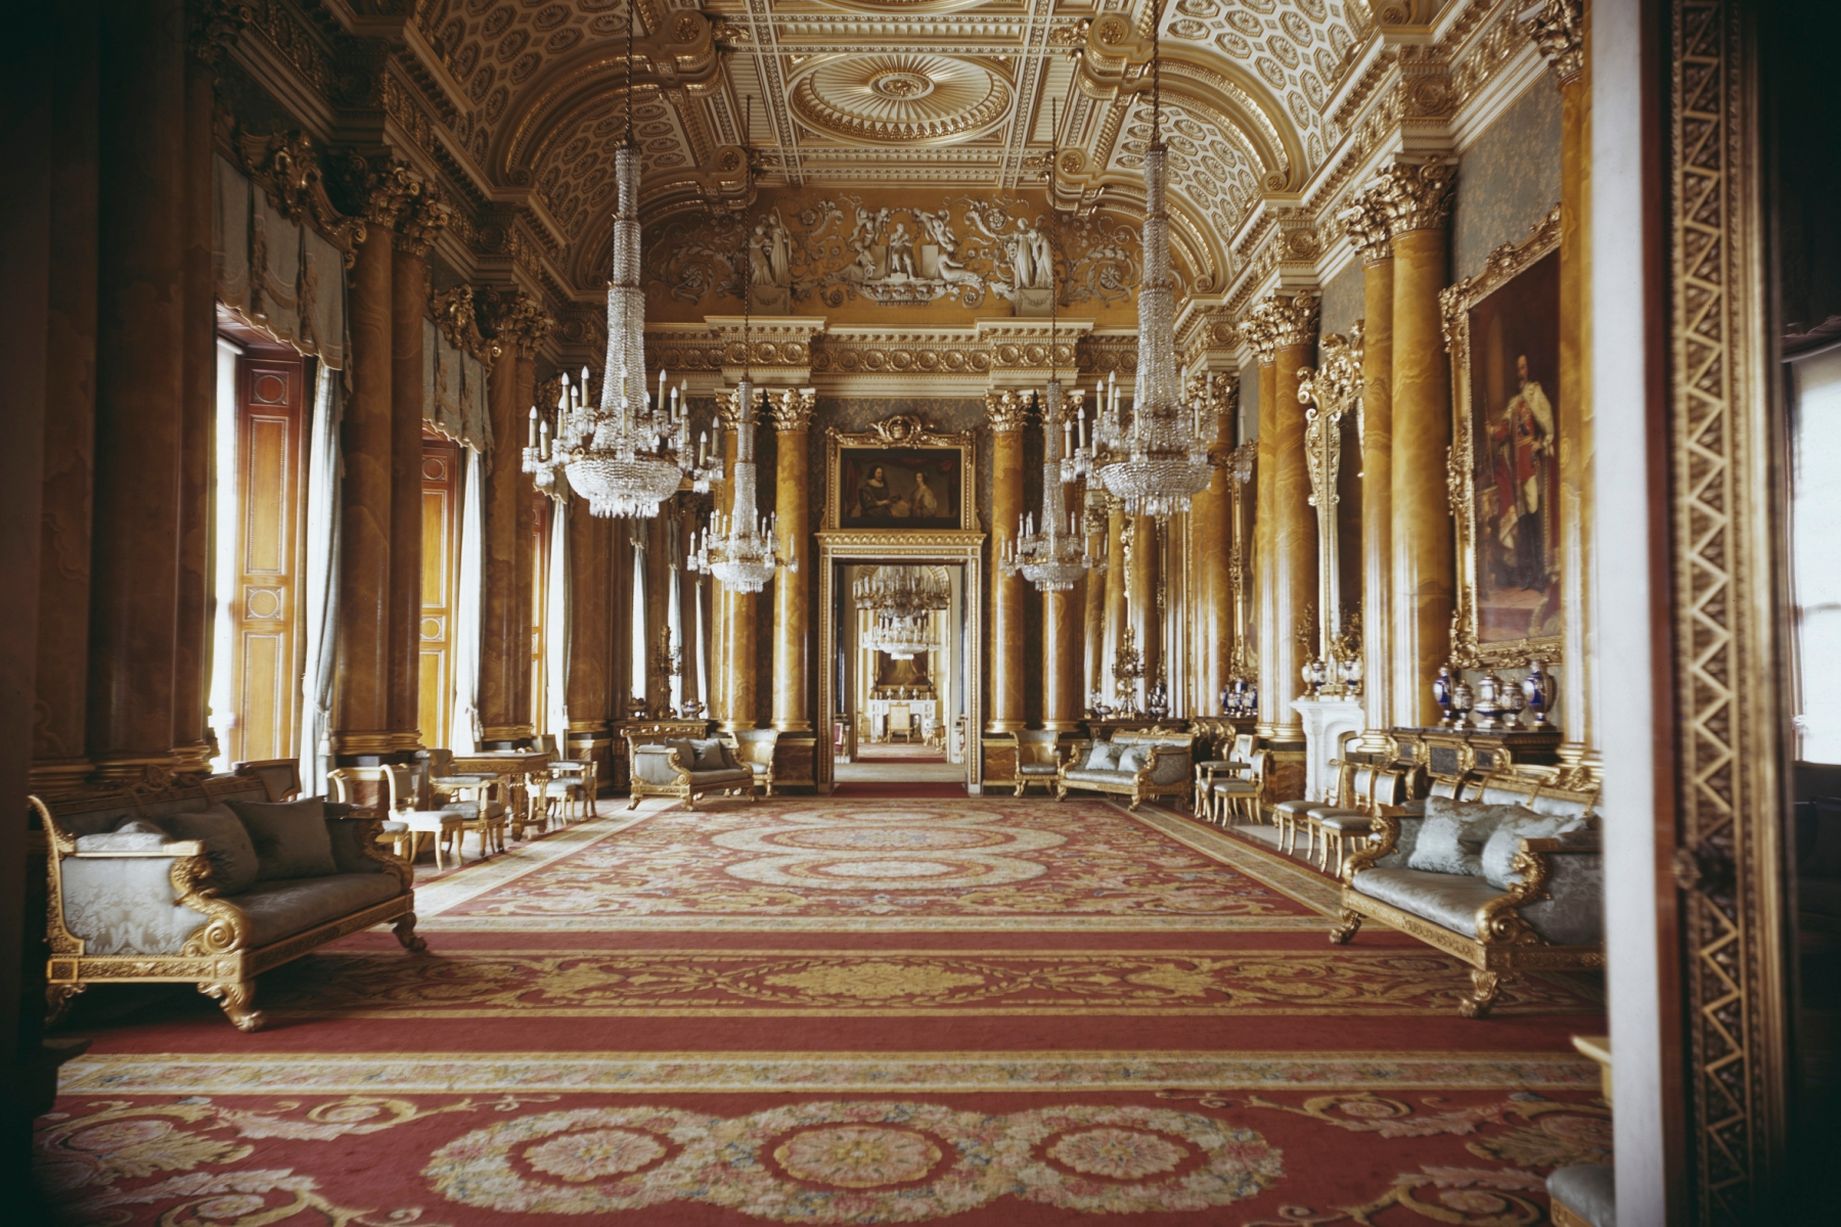 Buckingham Palace Rooms Pictures Inside Buckingham Palace's